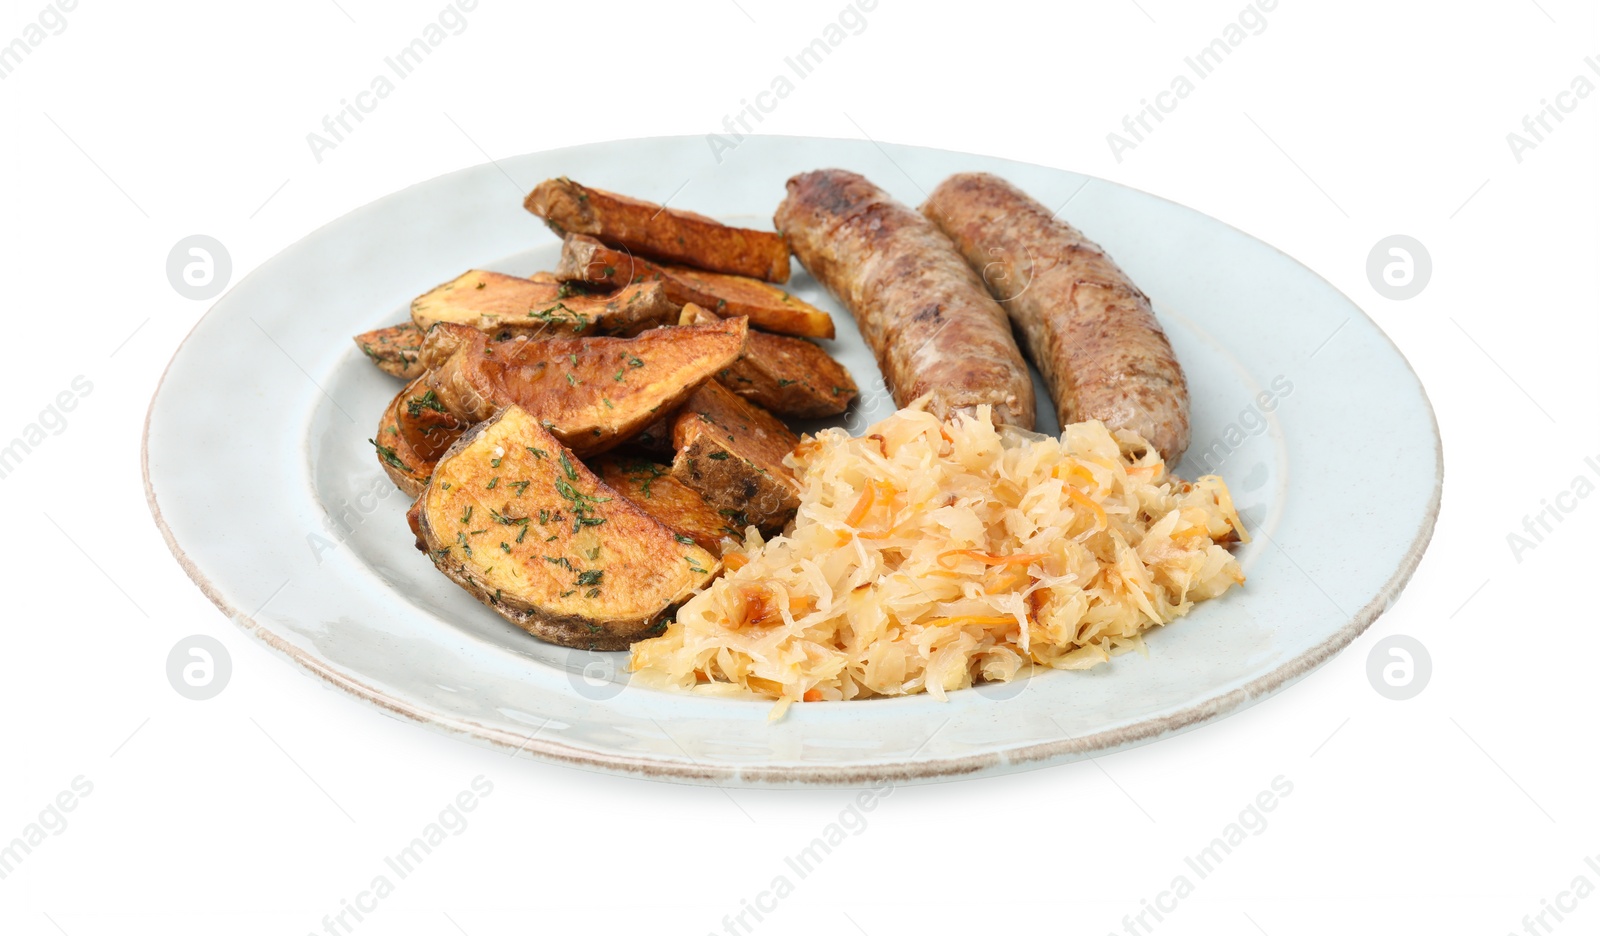 Photo of Plate with sauerkraut, sausages and potatoes isolated on white